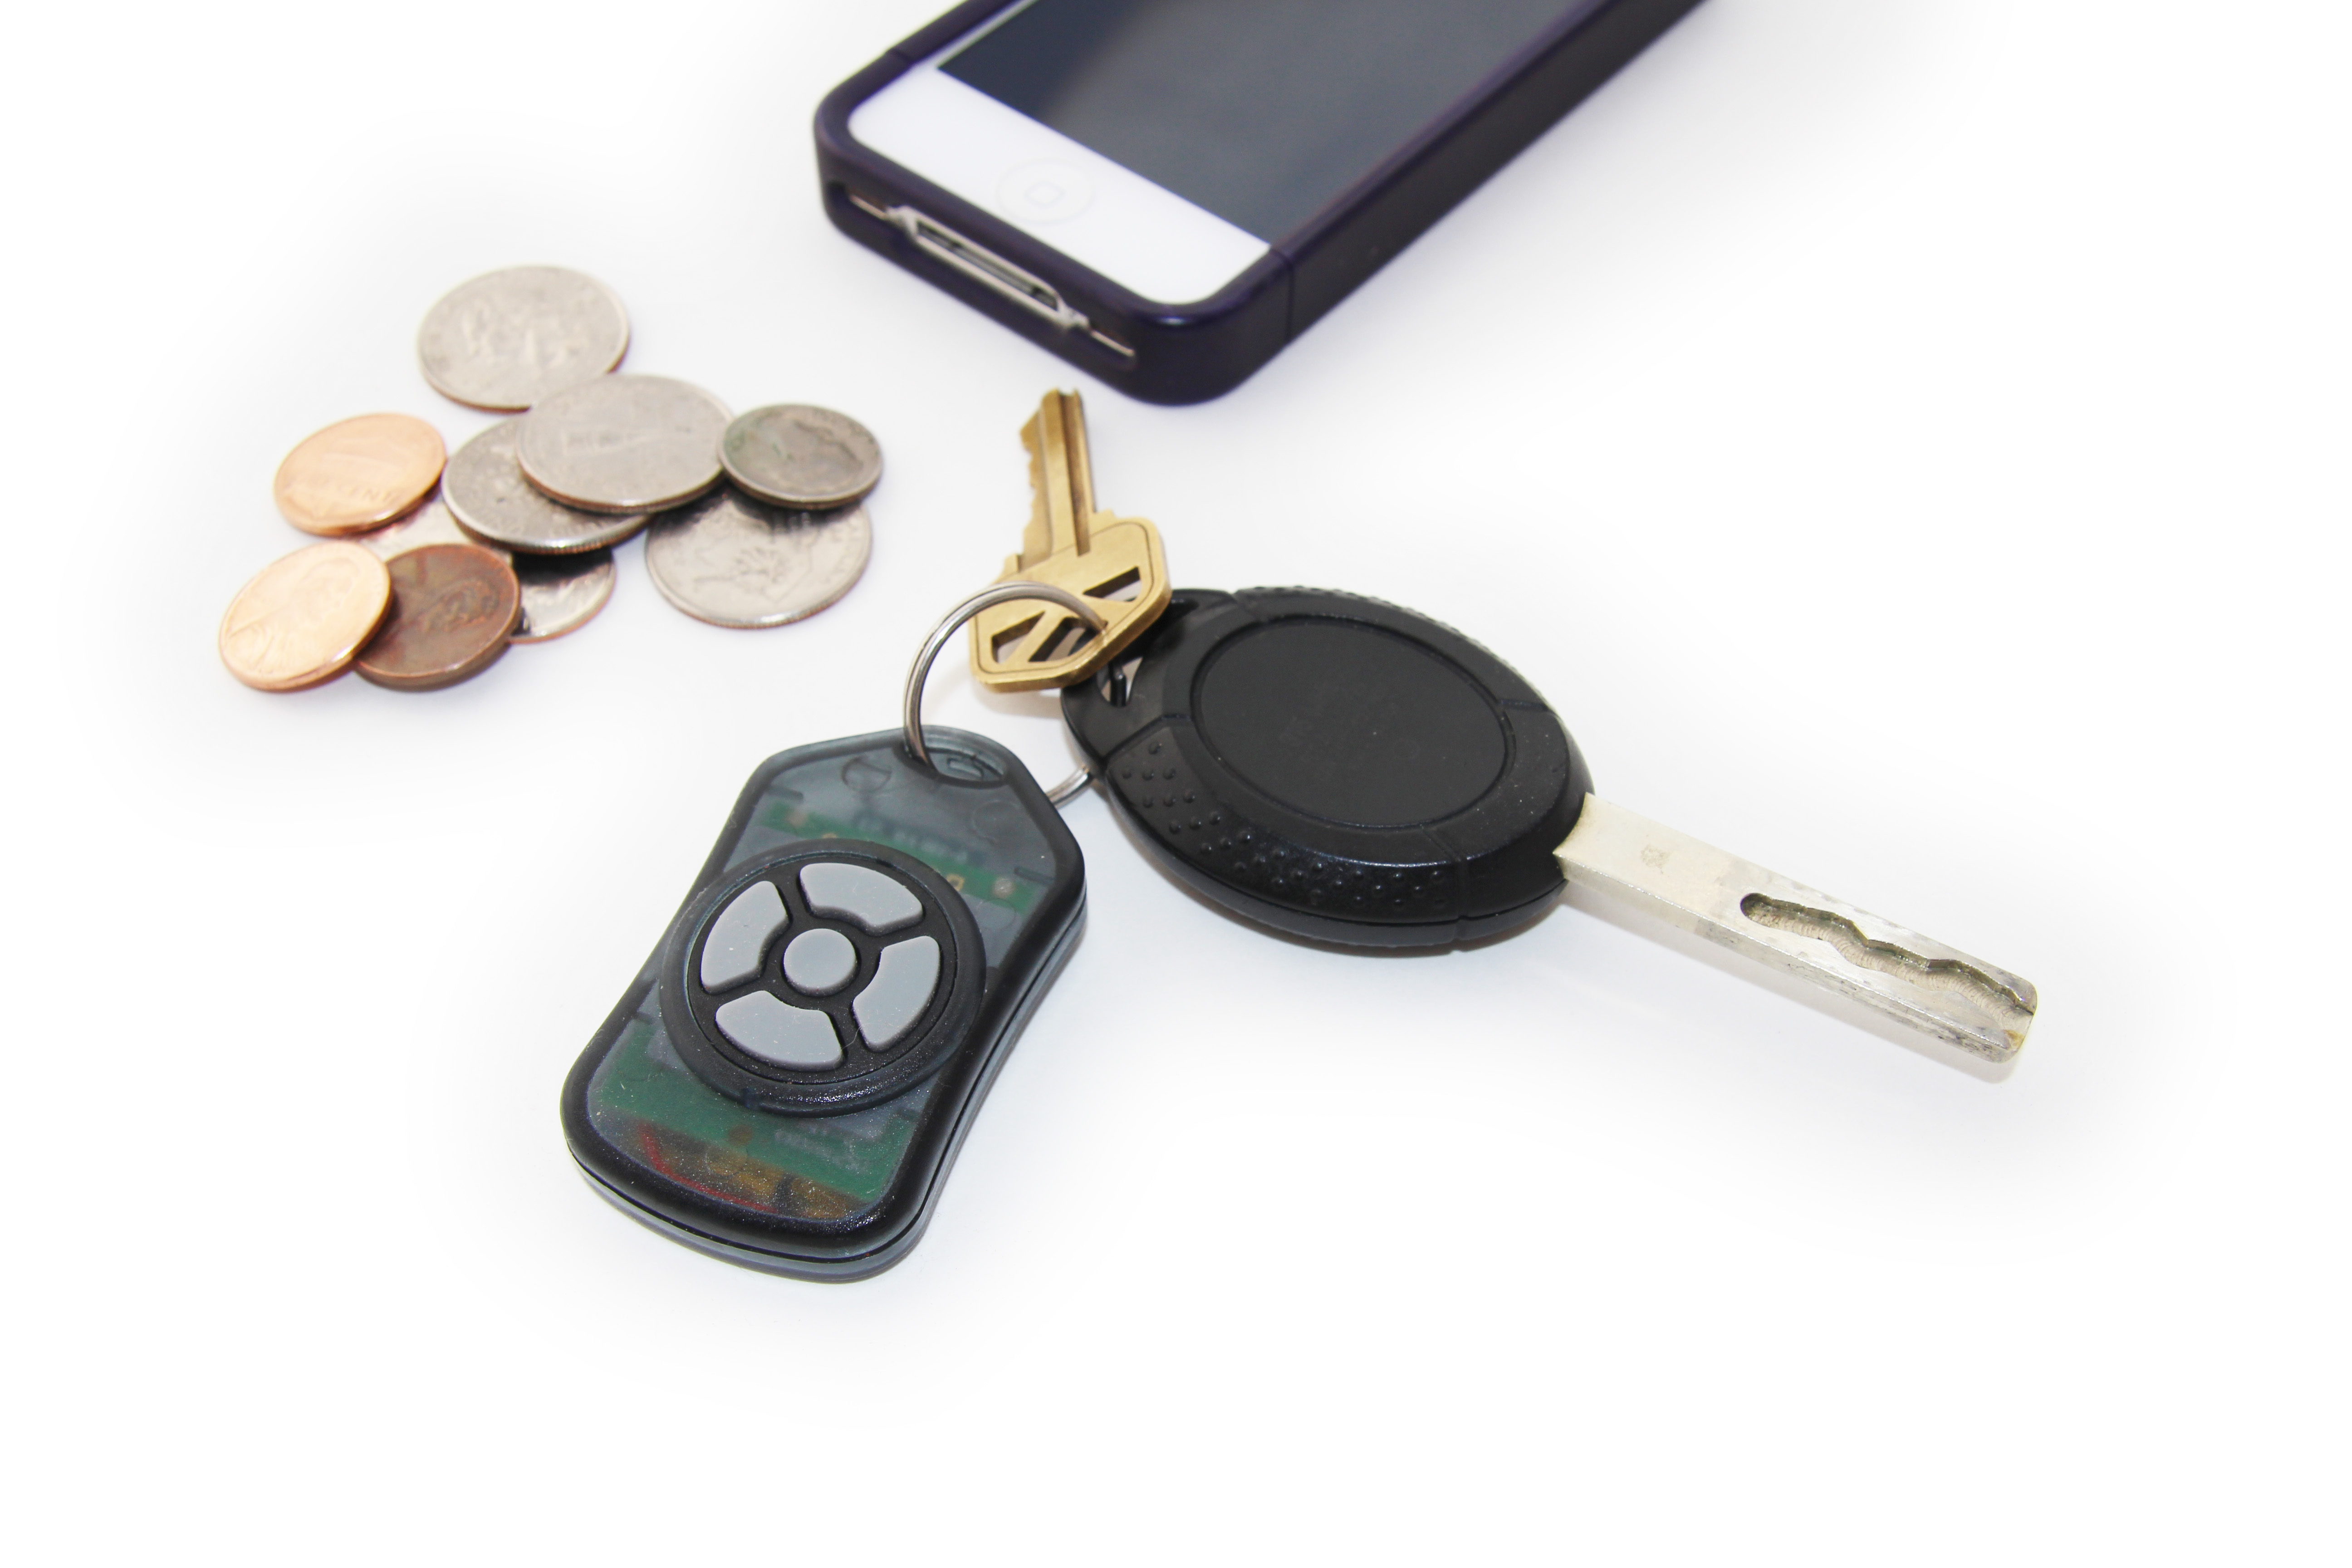 The AirTurn DIGIT II is small enough to fit on a keychain